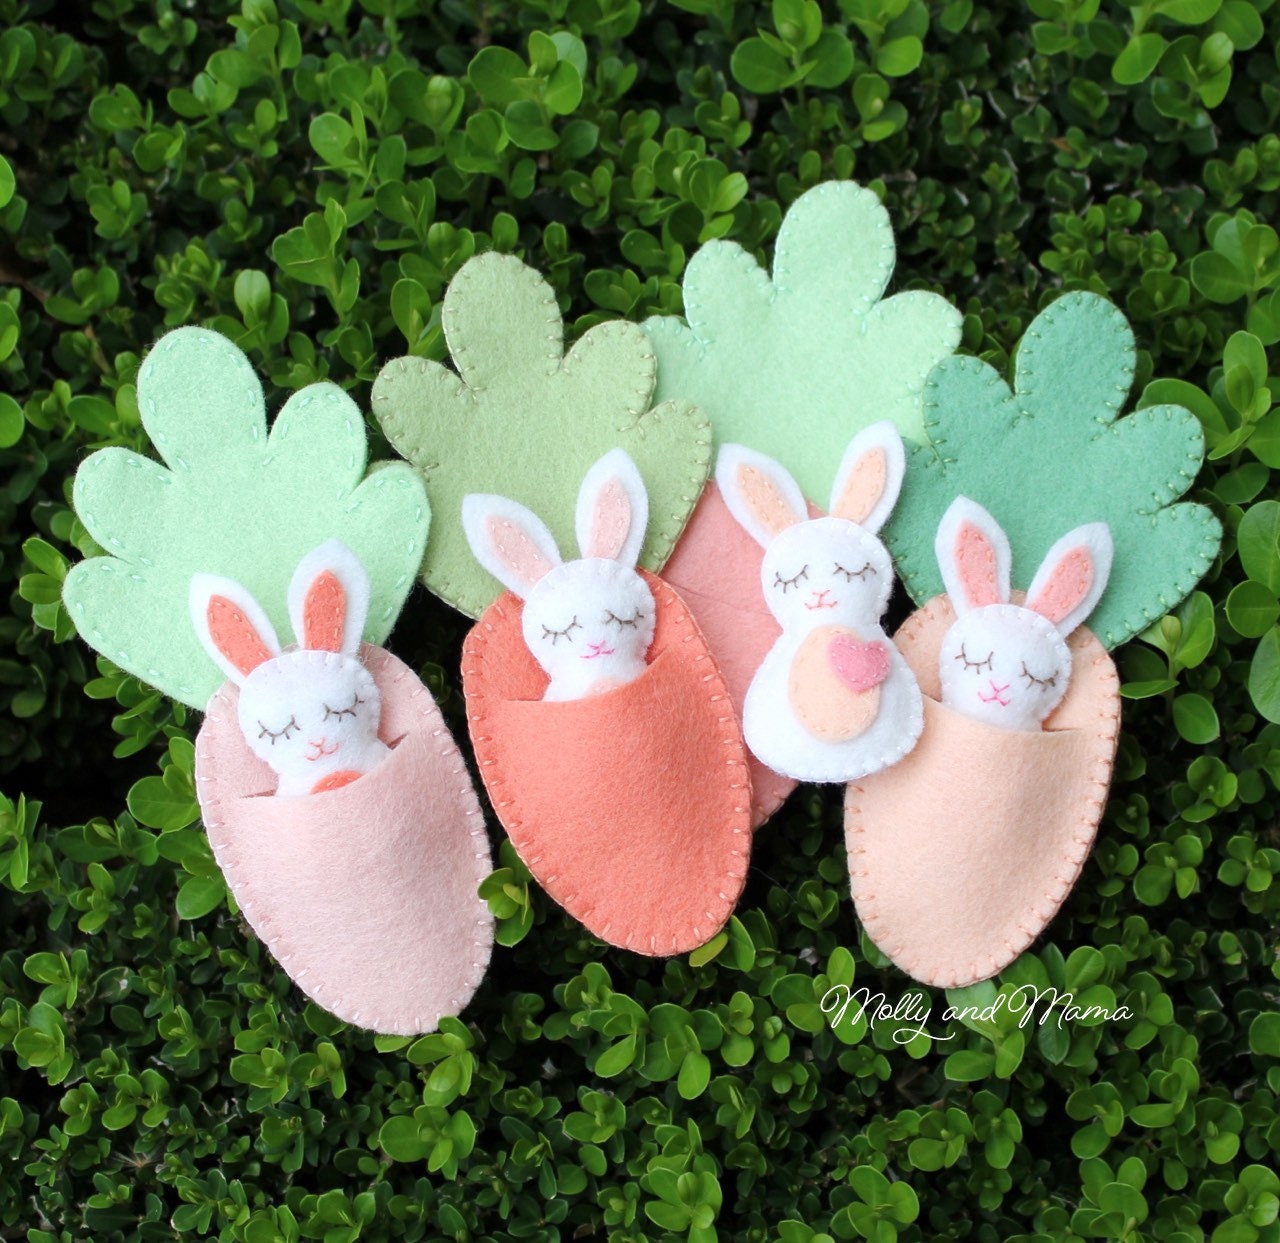 Baker Ross Aw360 Bunny Felt Stickers - Pack of 60, Embellishments for Easter Arts and Crafts Activities